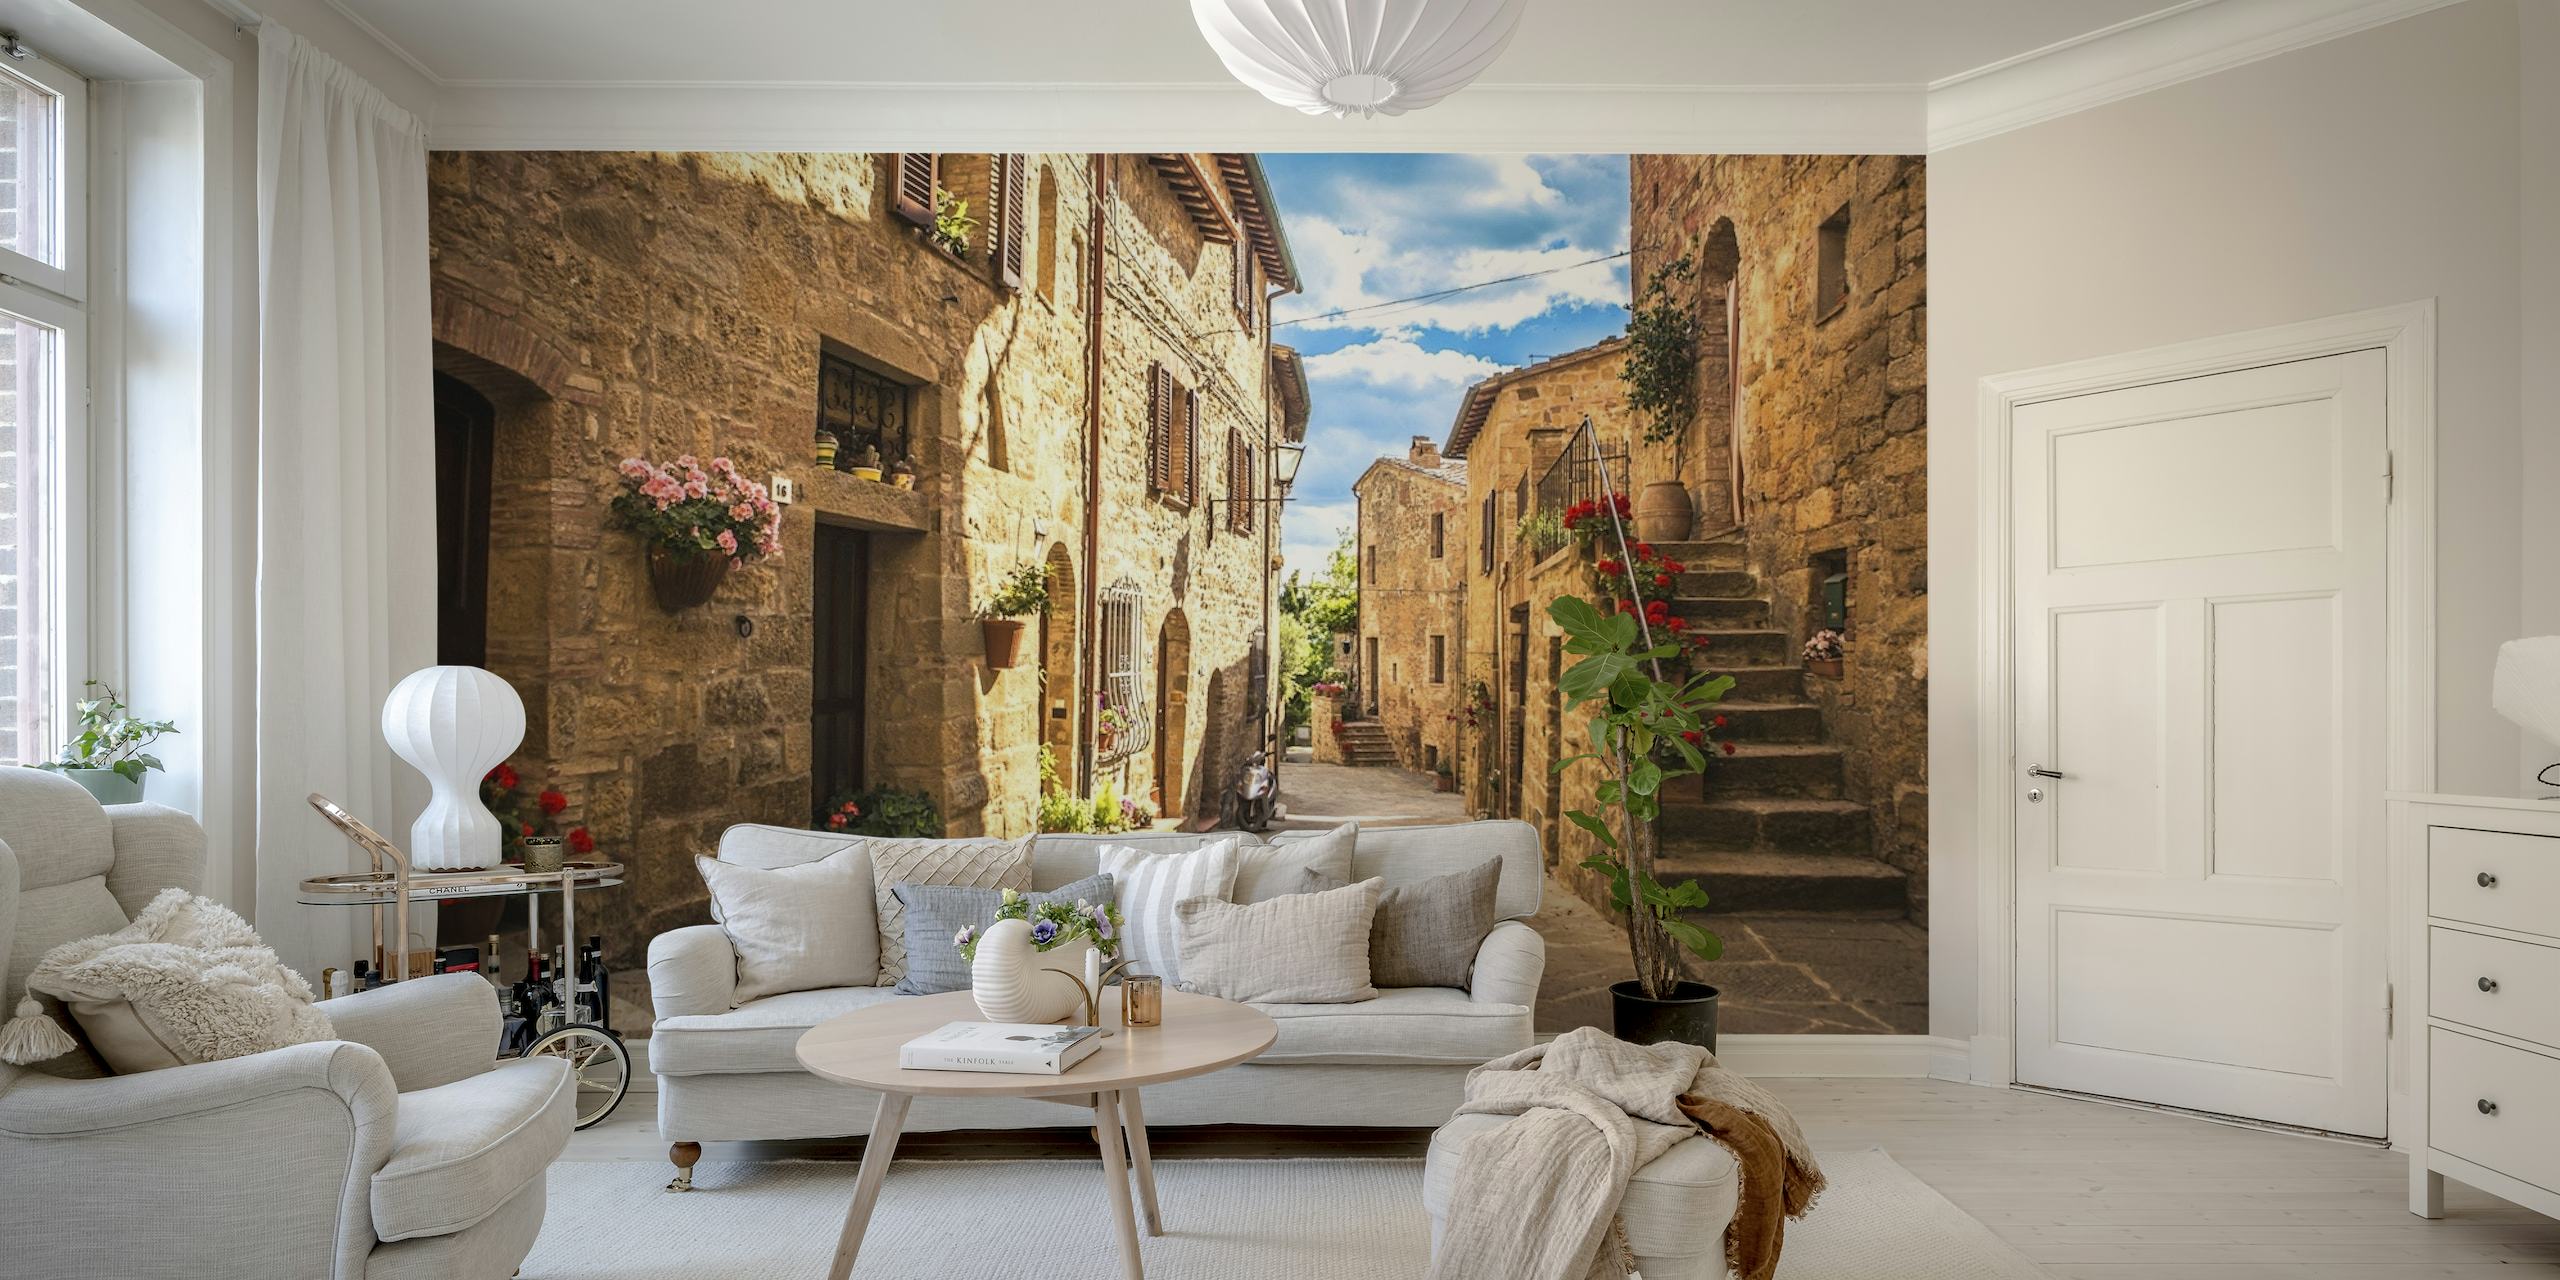 Italian alleyway wall mural with cobblestone path and traditional stone buildings